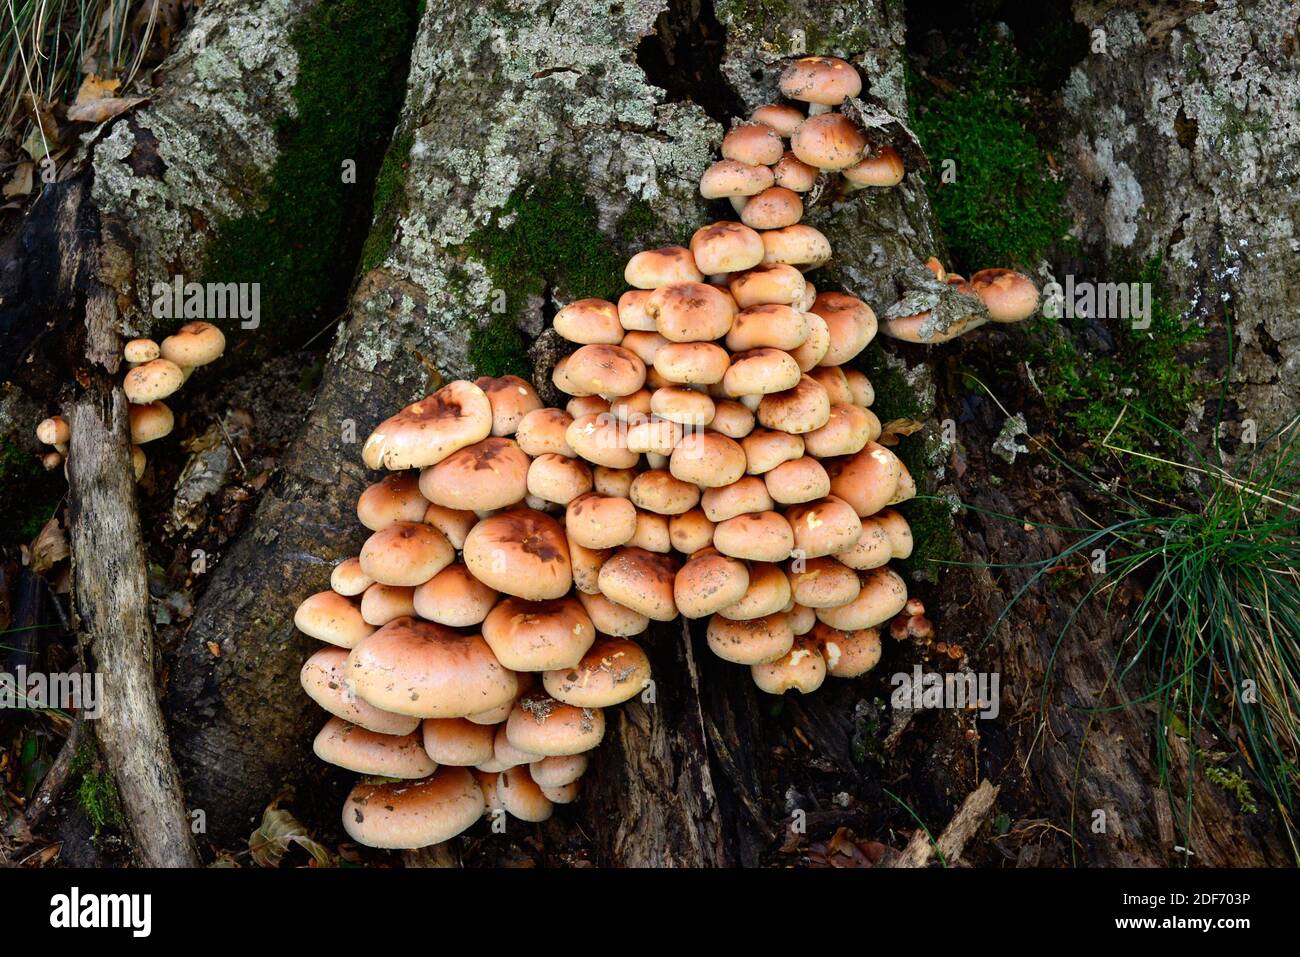 Sulphur tuft (Hypholoma fasciculare) is a poisonous mushroom. This photo was taken in Montseny Biosphere Reserve, Barcelona province, Catalonia, Stock Photo